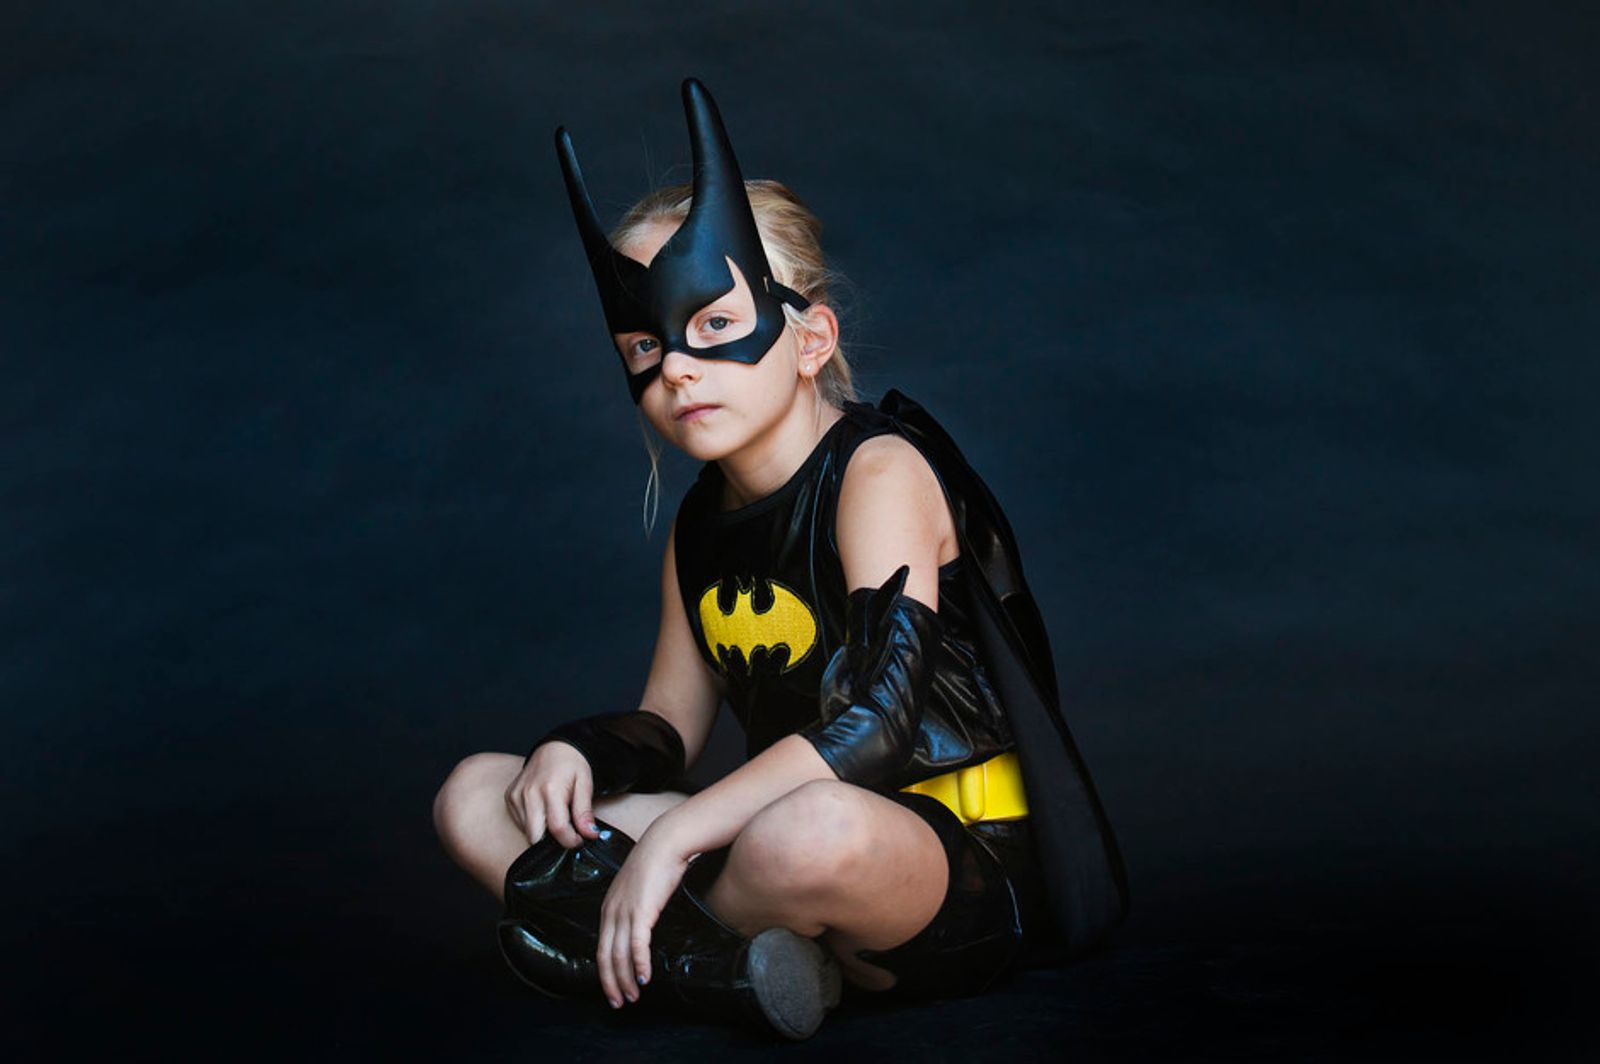 © Steven Edson - Young girl dressed in Bat Girl costume. Belmont, MA